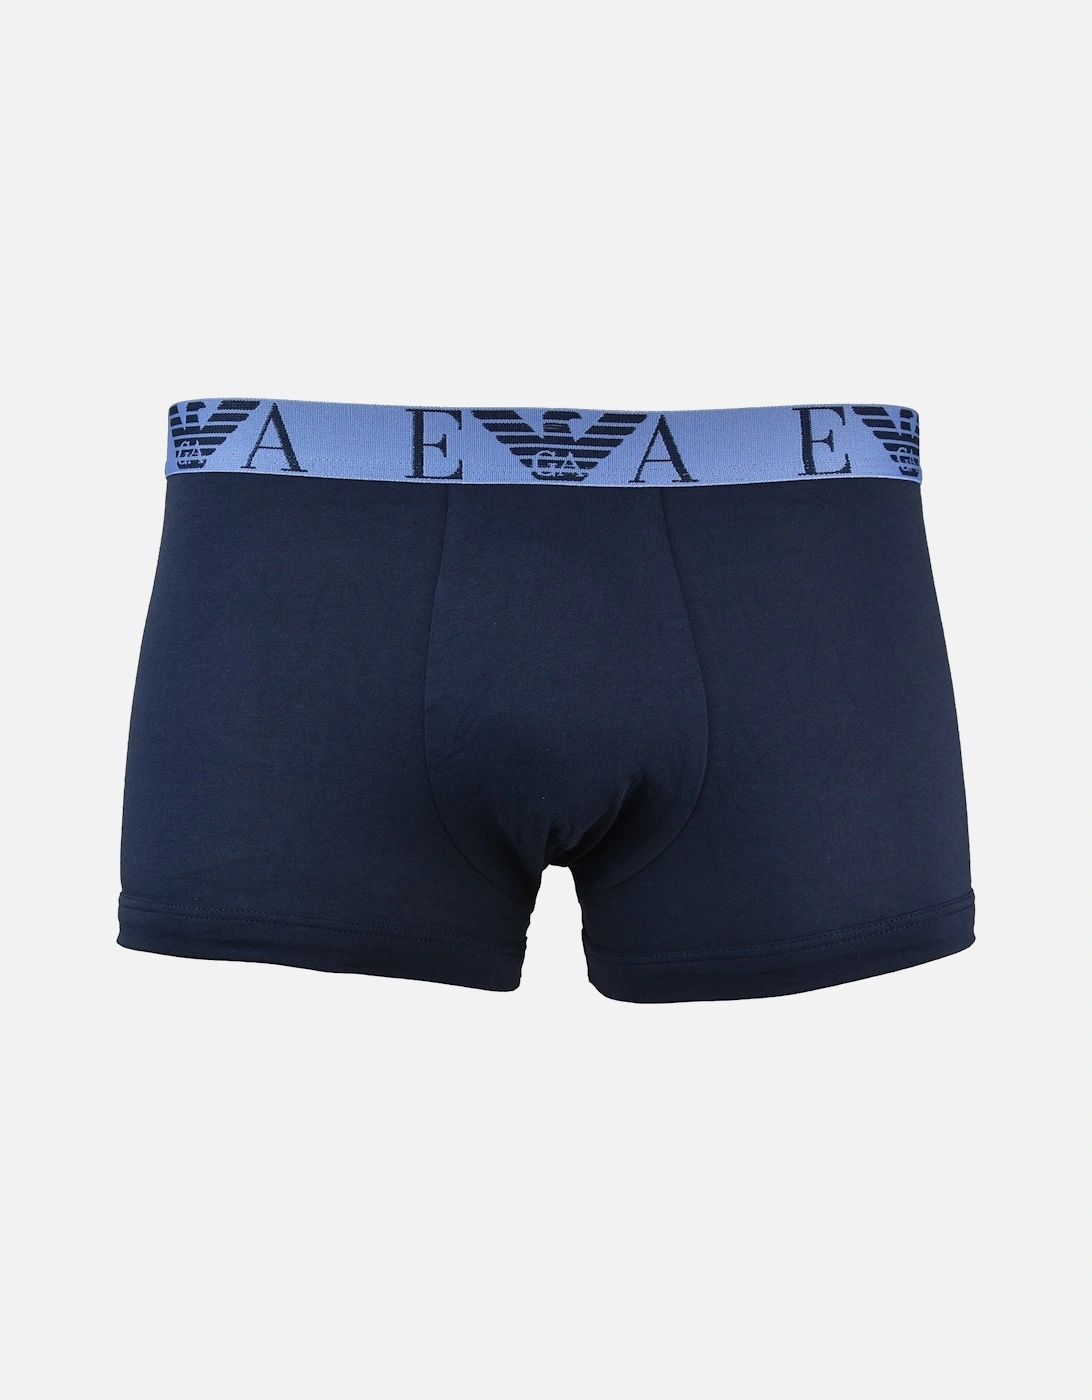 Mens 3 Pack Boxers (Navy/Blue)